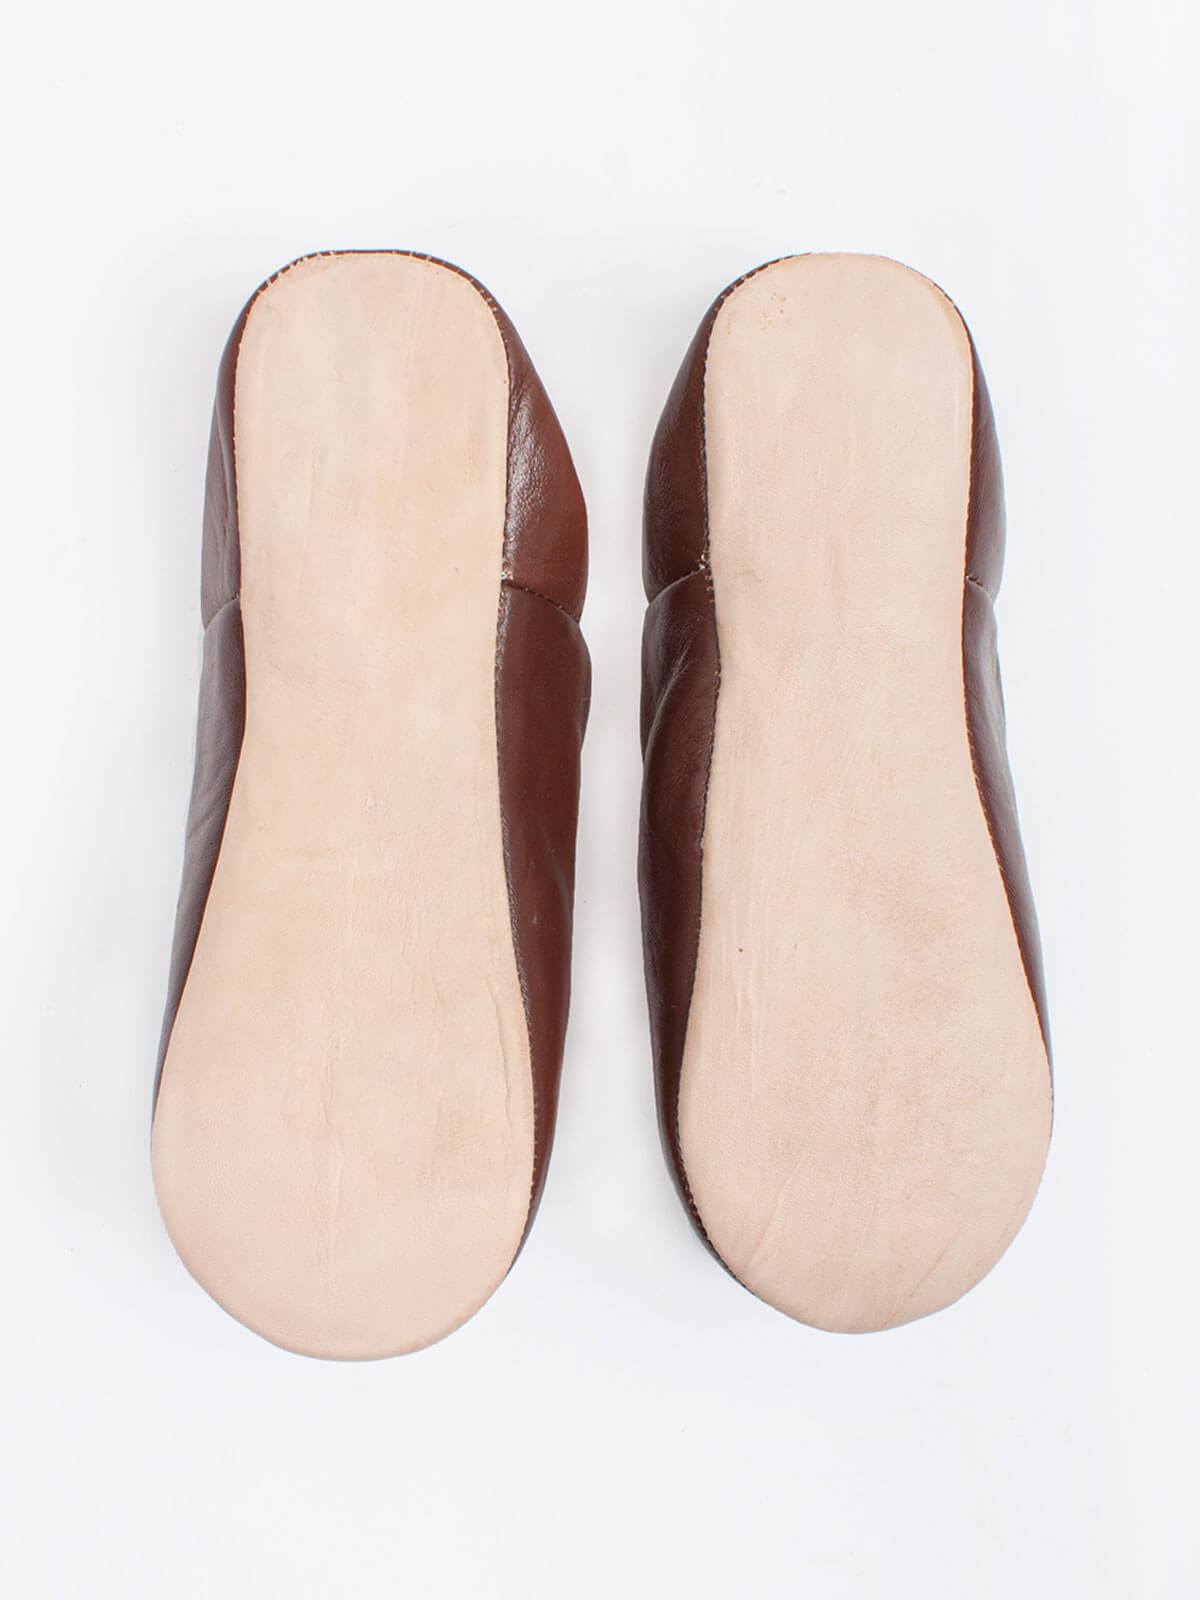 MOROCCAN MENS BABOUCHE SLIPPERS - CHOCOLATE